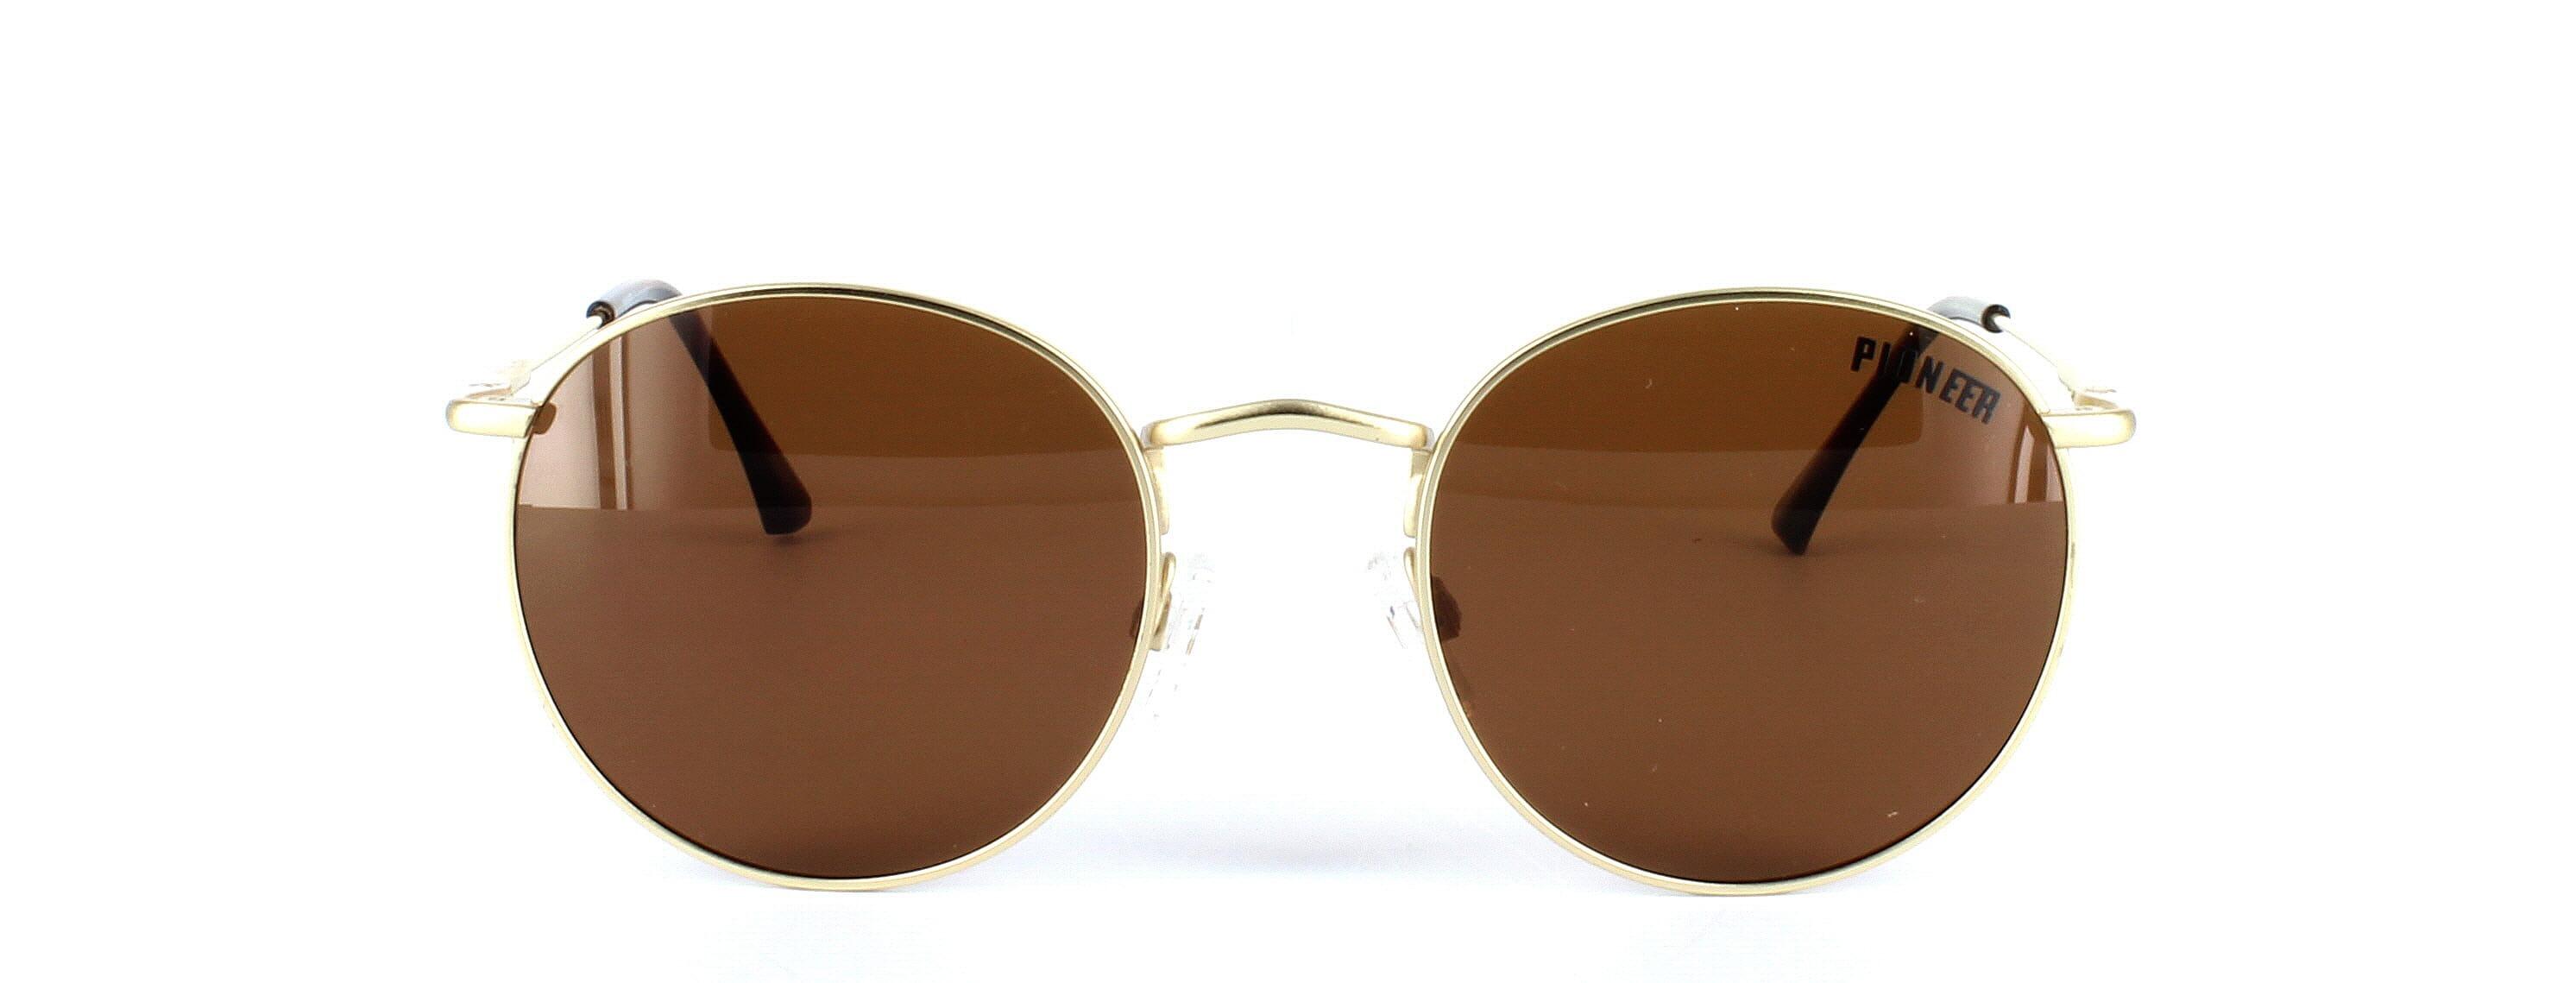 Olmeto - Unisex round shaped prescription sunglasses in gold - choose green, brown or grey tints inc in the price - image view 2